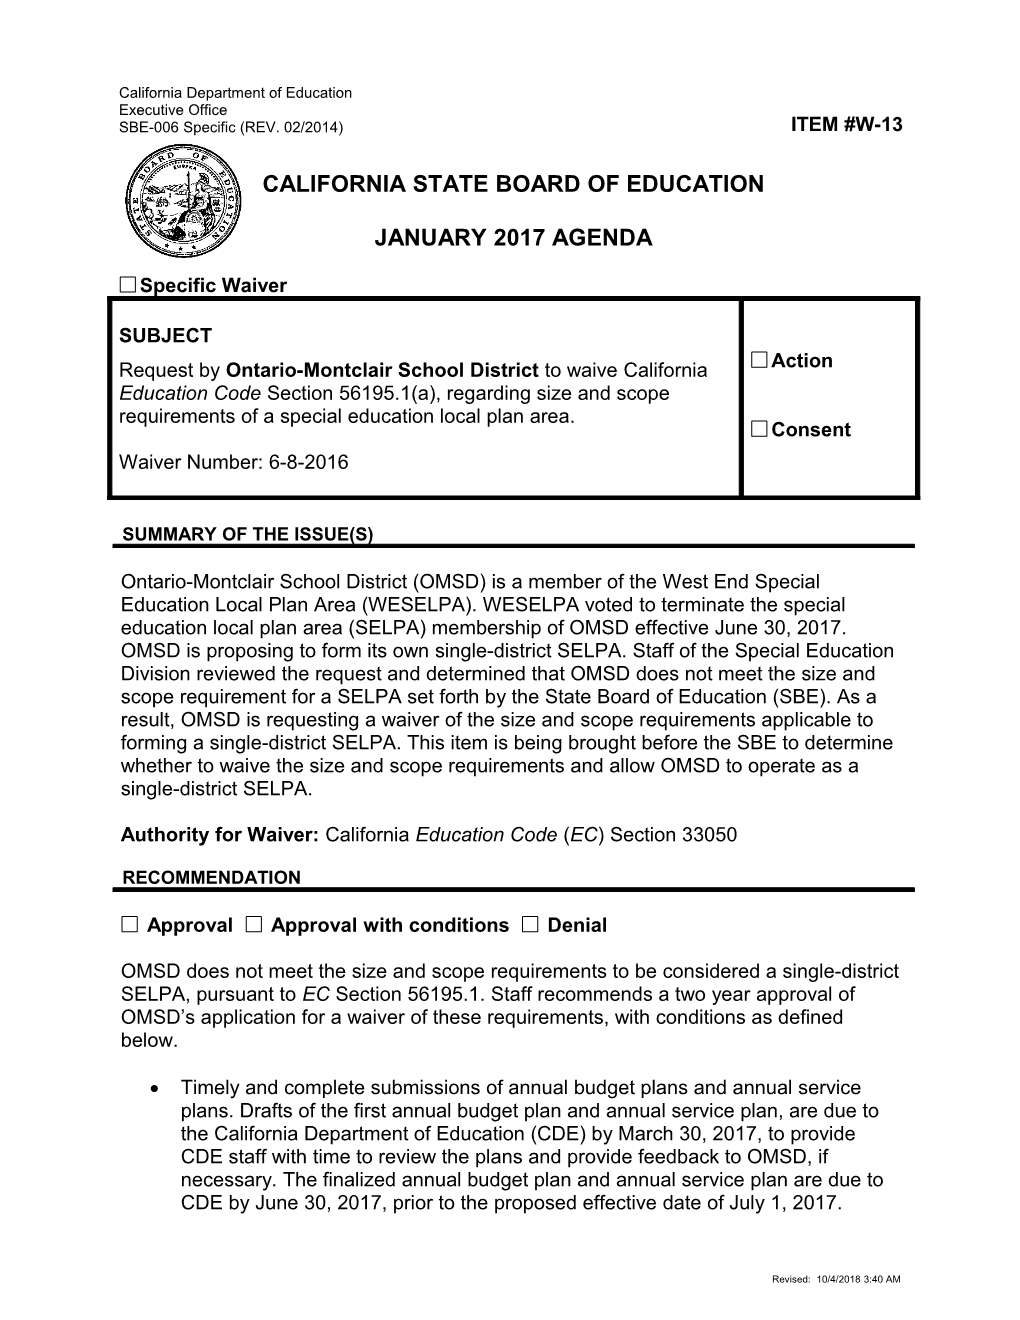 January 2017 Waiver Item W-13 - Meeting Agendas (CA State Board of Education)